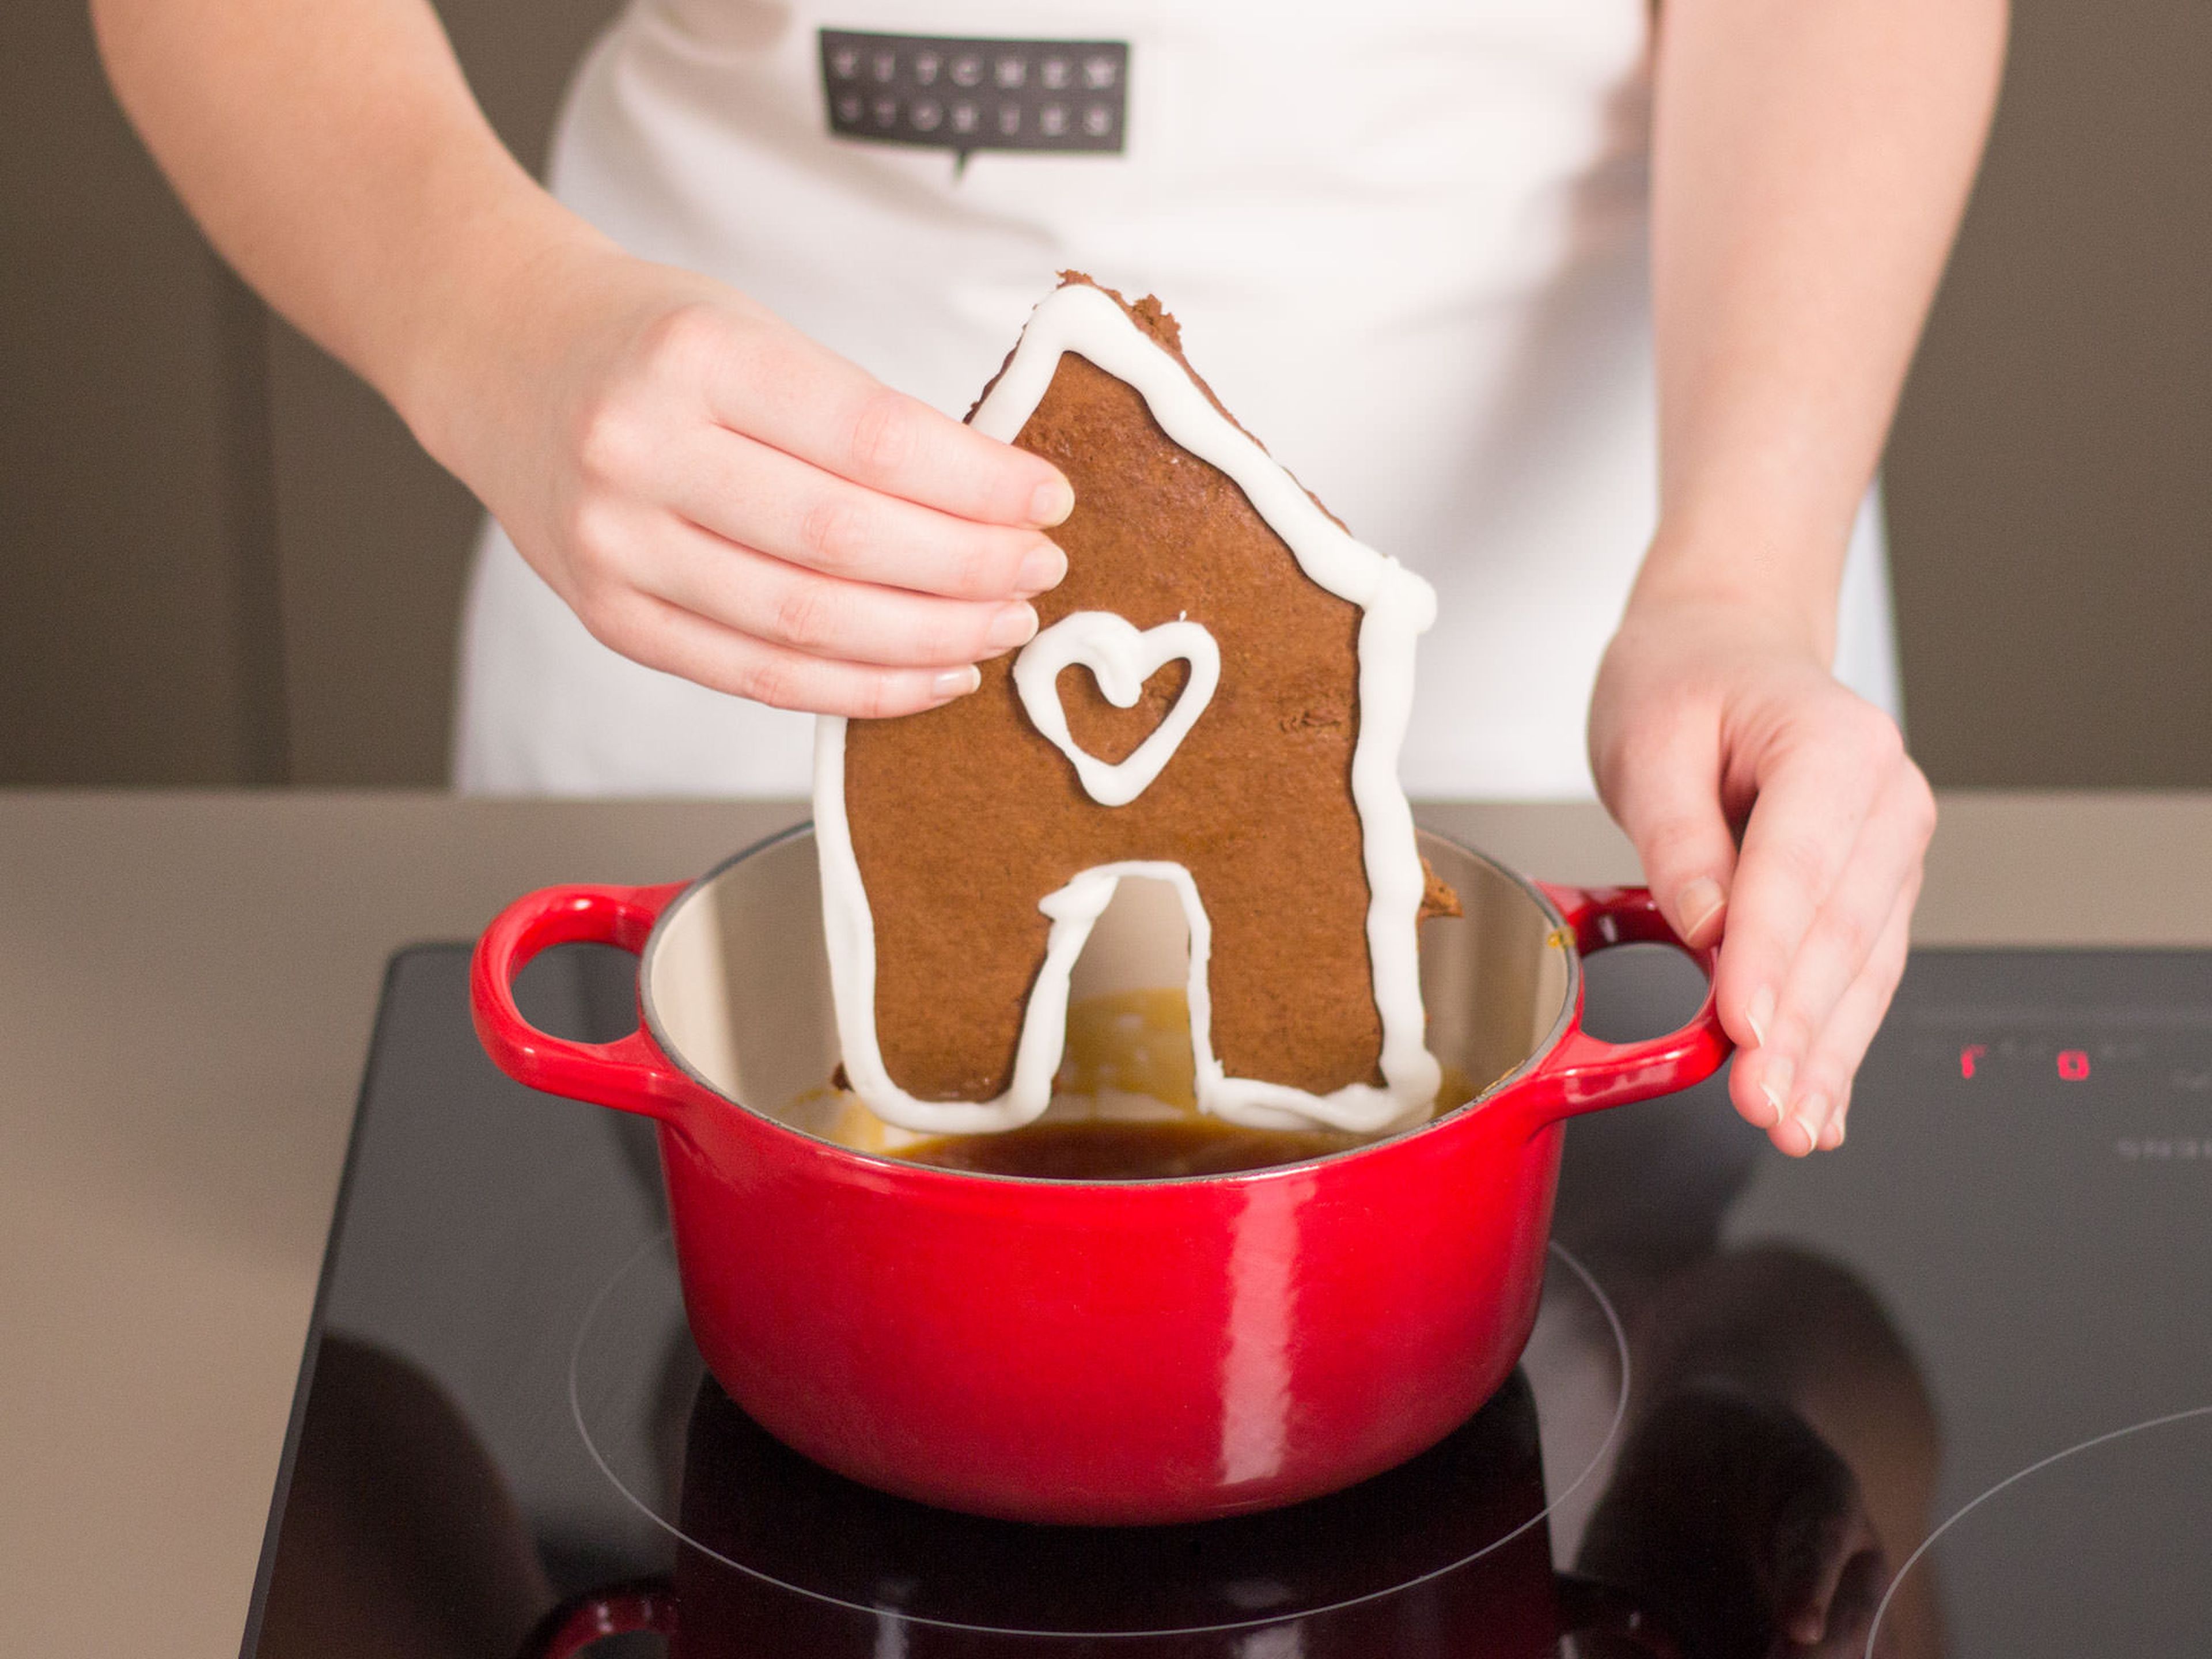 Melt sugar and a little water in a small saucepan and cook over medium heat until a dark caramel forms. Carefully dip bottom of house pieces in caramel and stick to a serving plate. Use caramel to stick together other inner edges and to attach Christmas trees and gingerbread men.